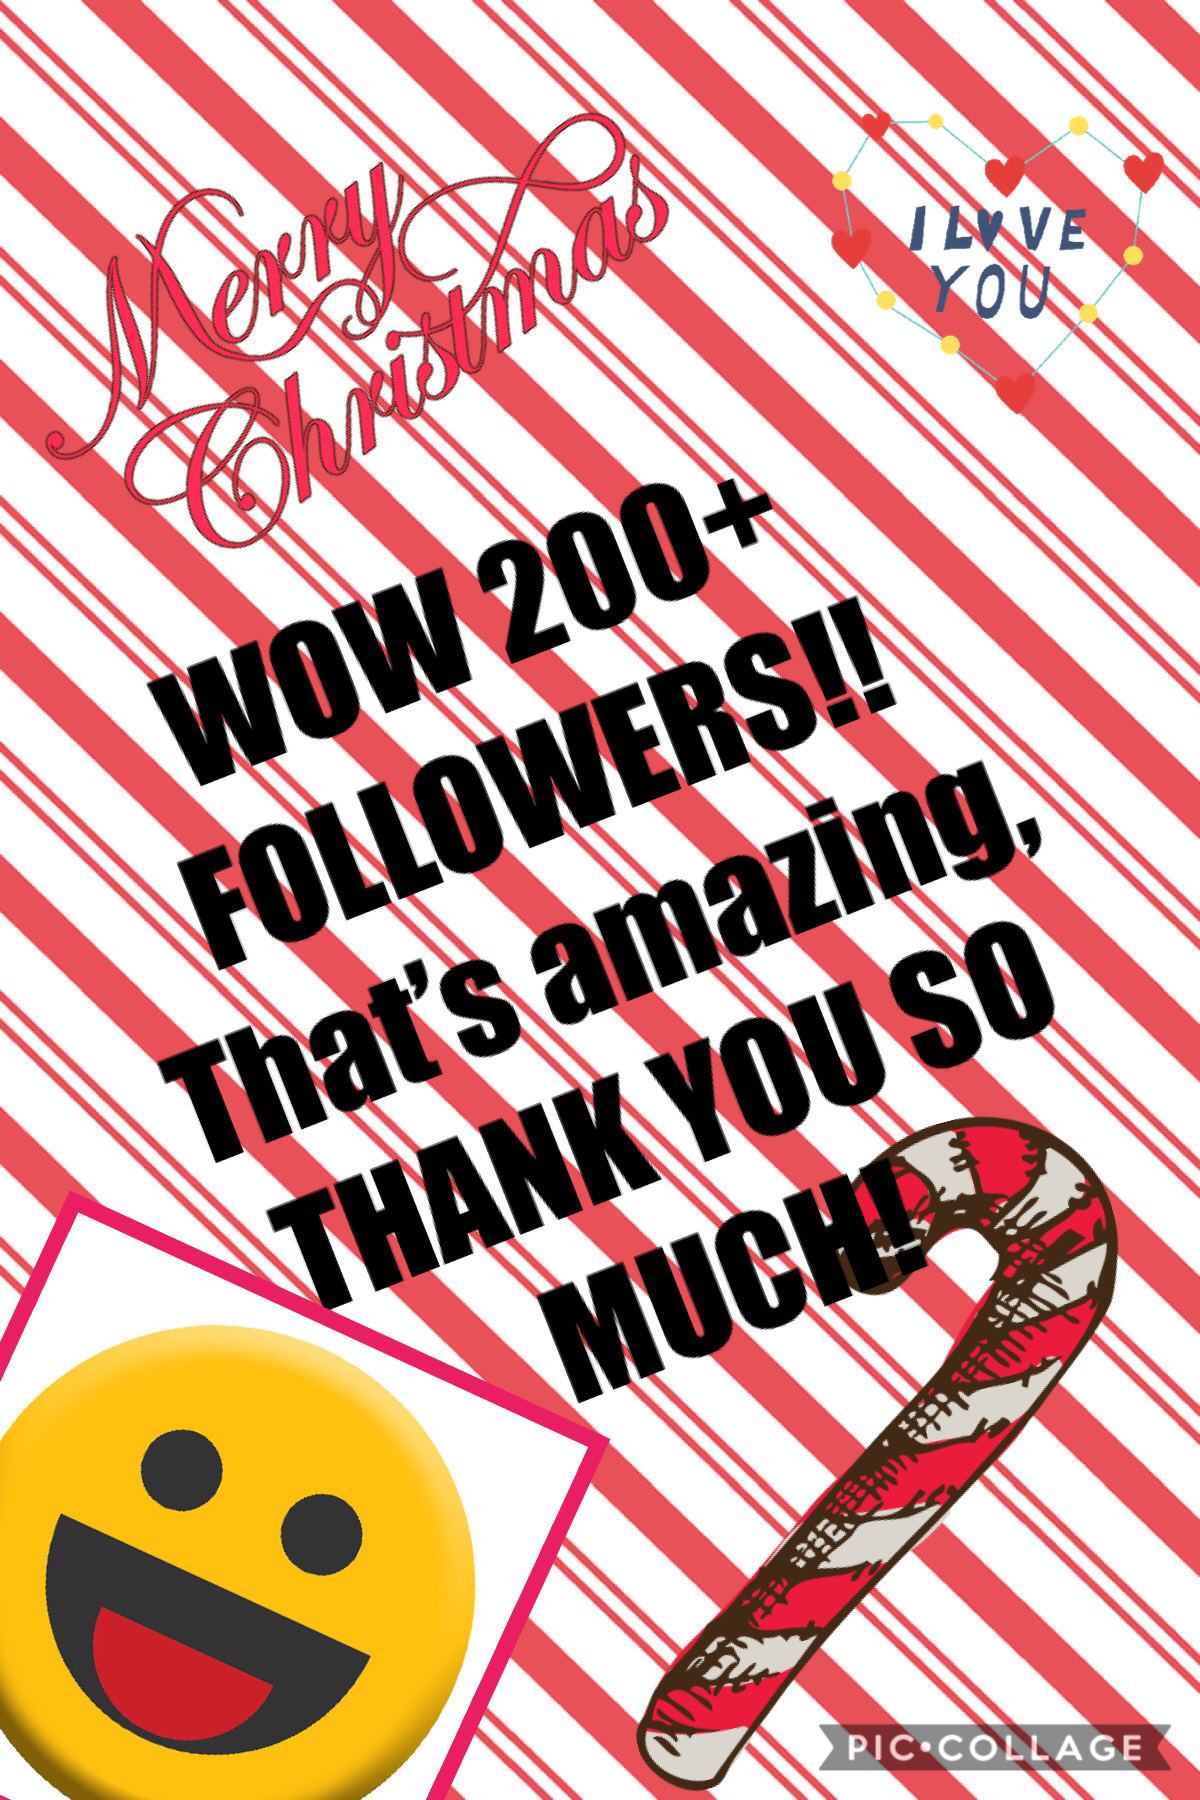 Thank you all